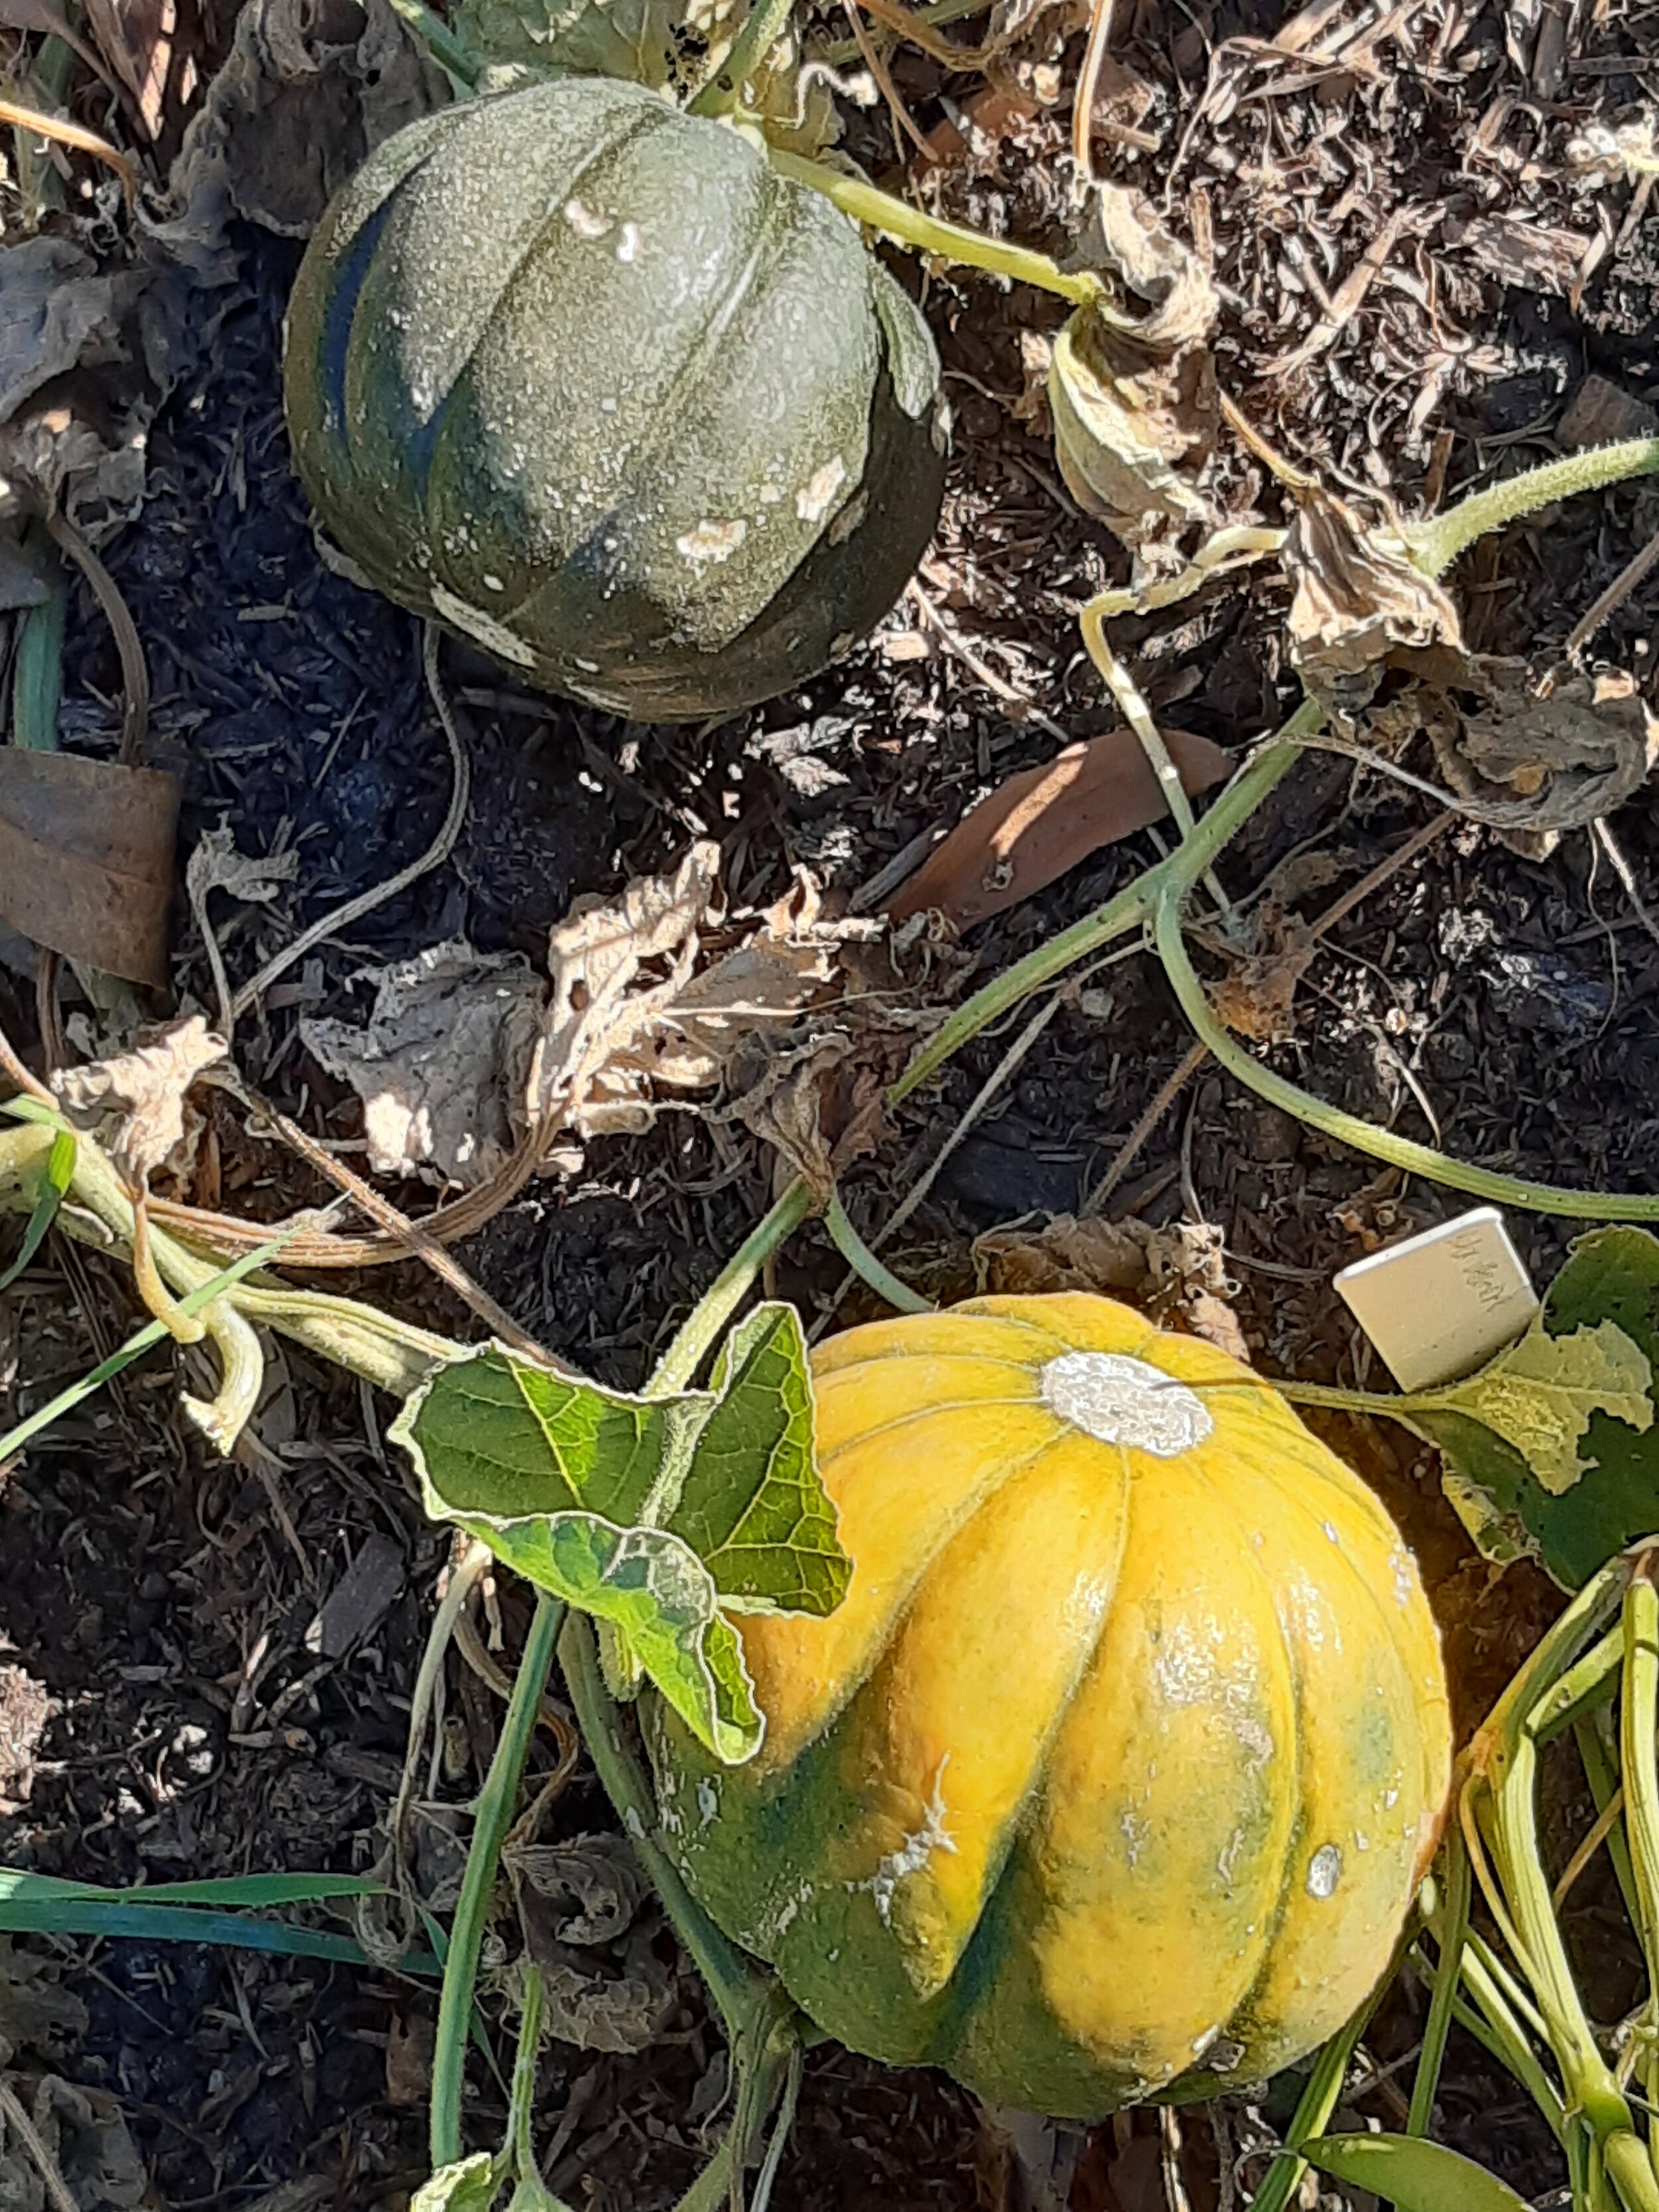  immature melon growing with fully ripe melon. Exhibiting changes in colour, aroma and feel. 